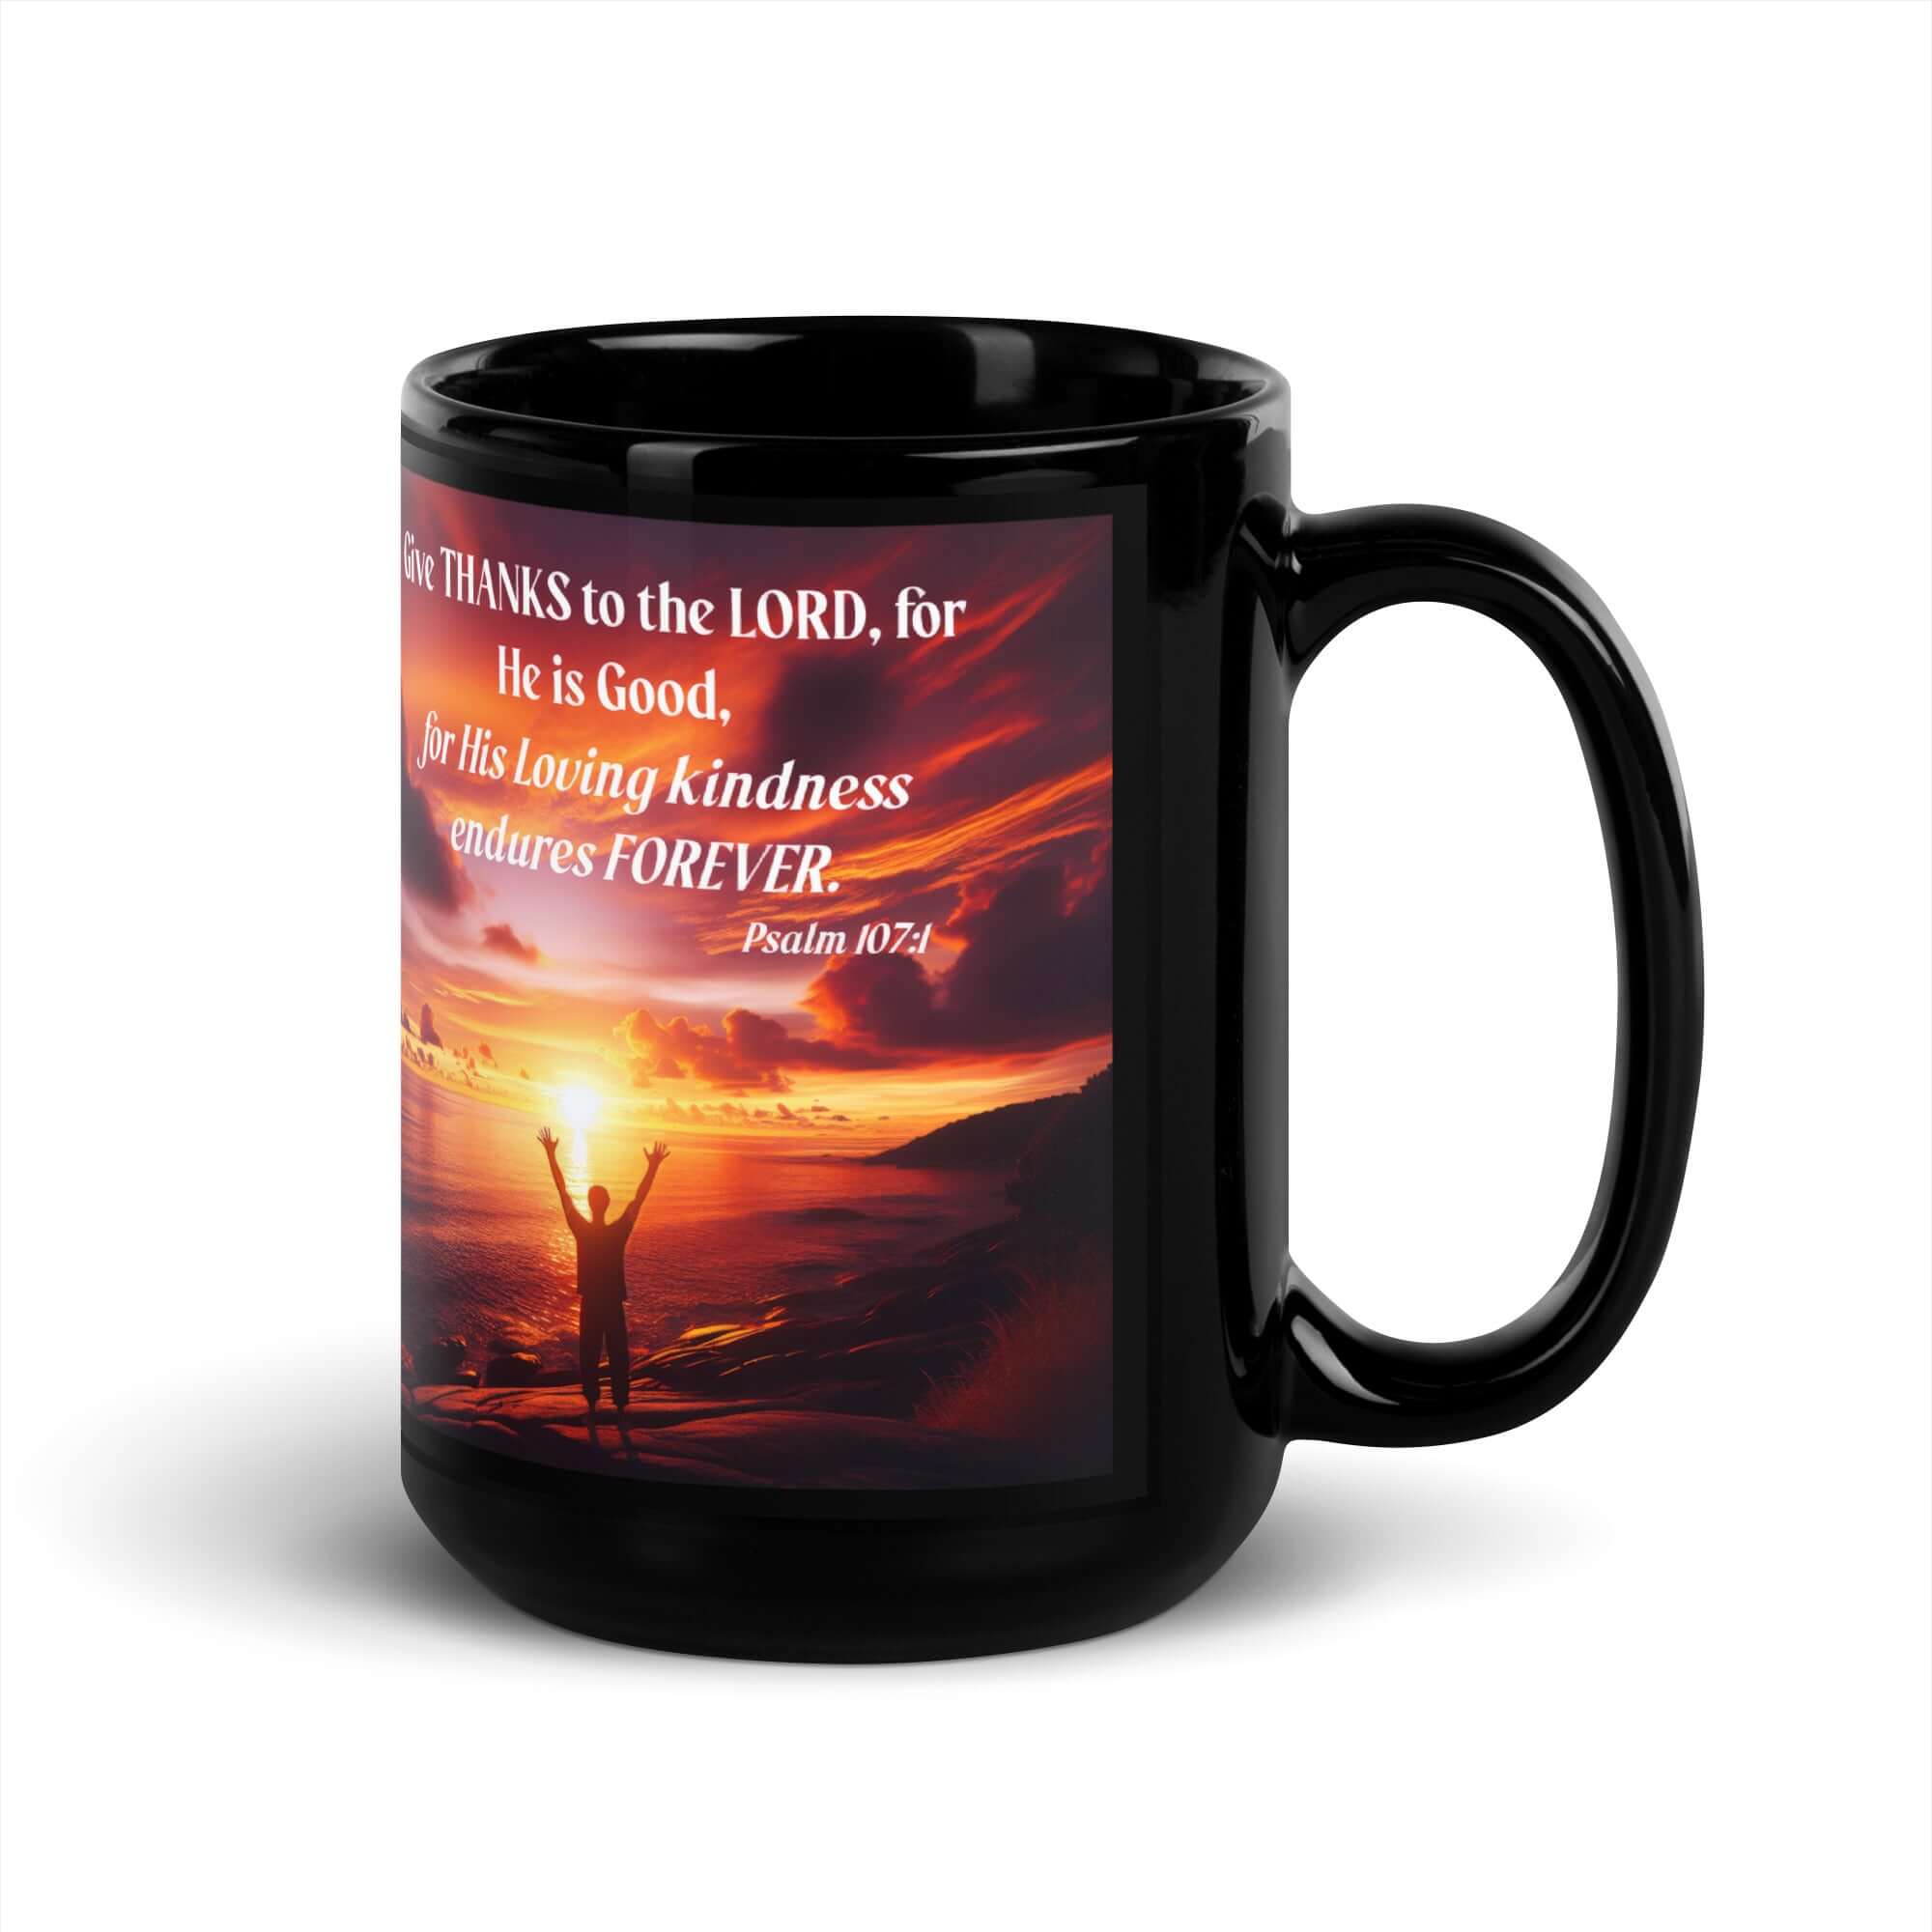 Psalm 107:1 - Bible Verse, Give Thanks to the Lord Black Mug